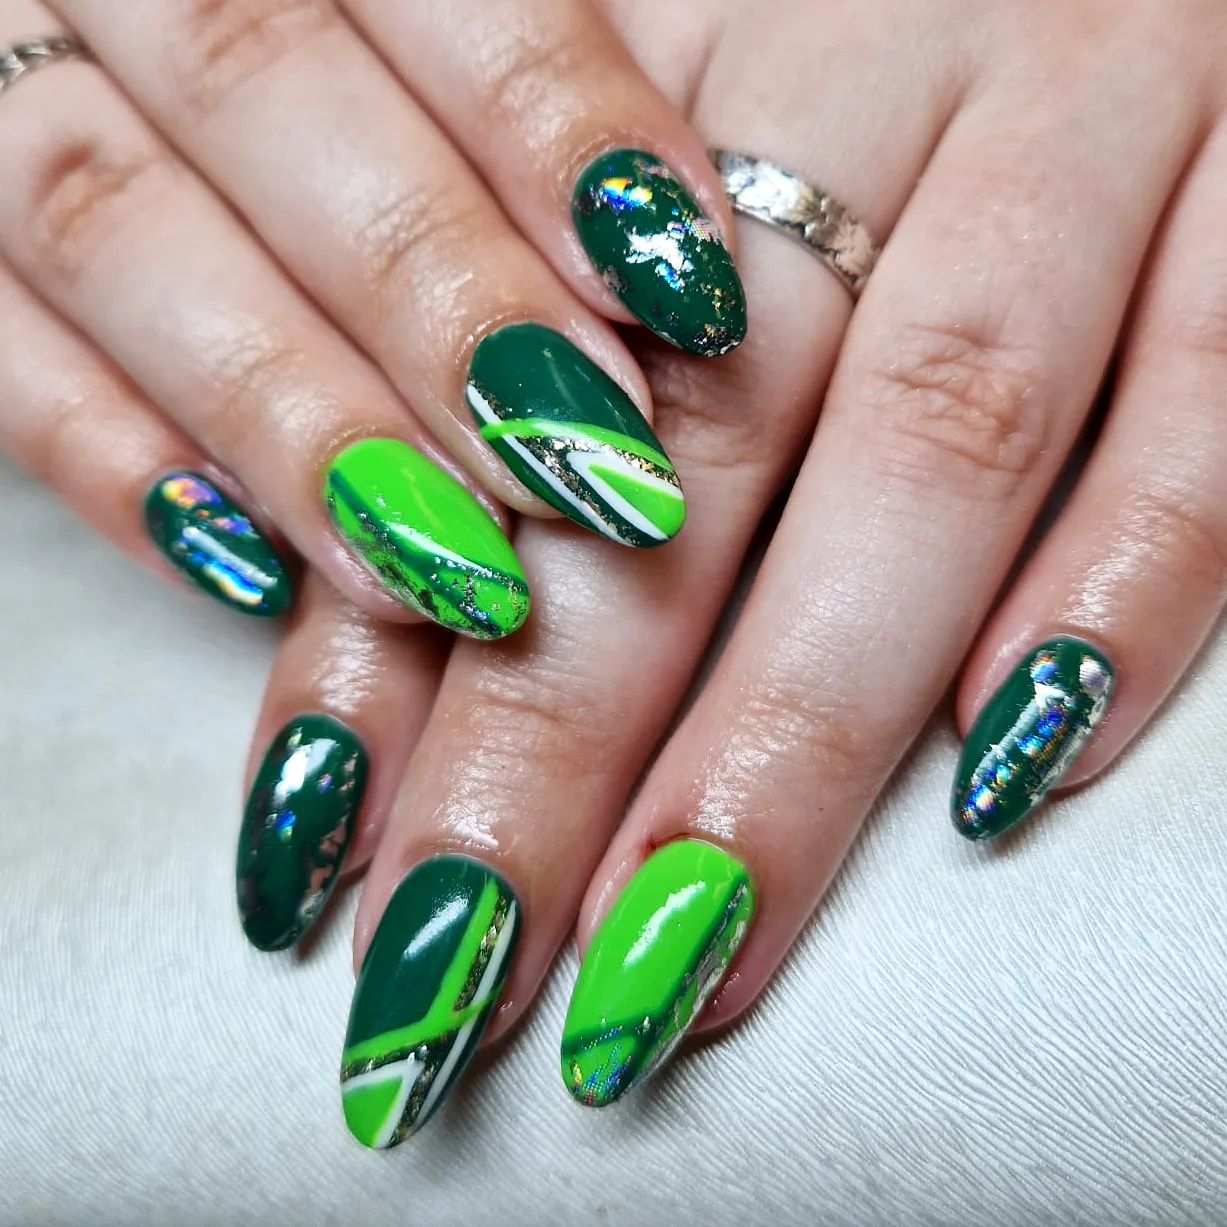 Those who like a detailed nail design should definitely try this! All you need is a dark and light green nail polish and a glitter.